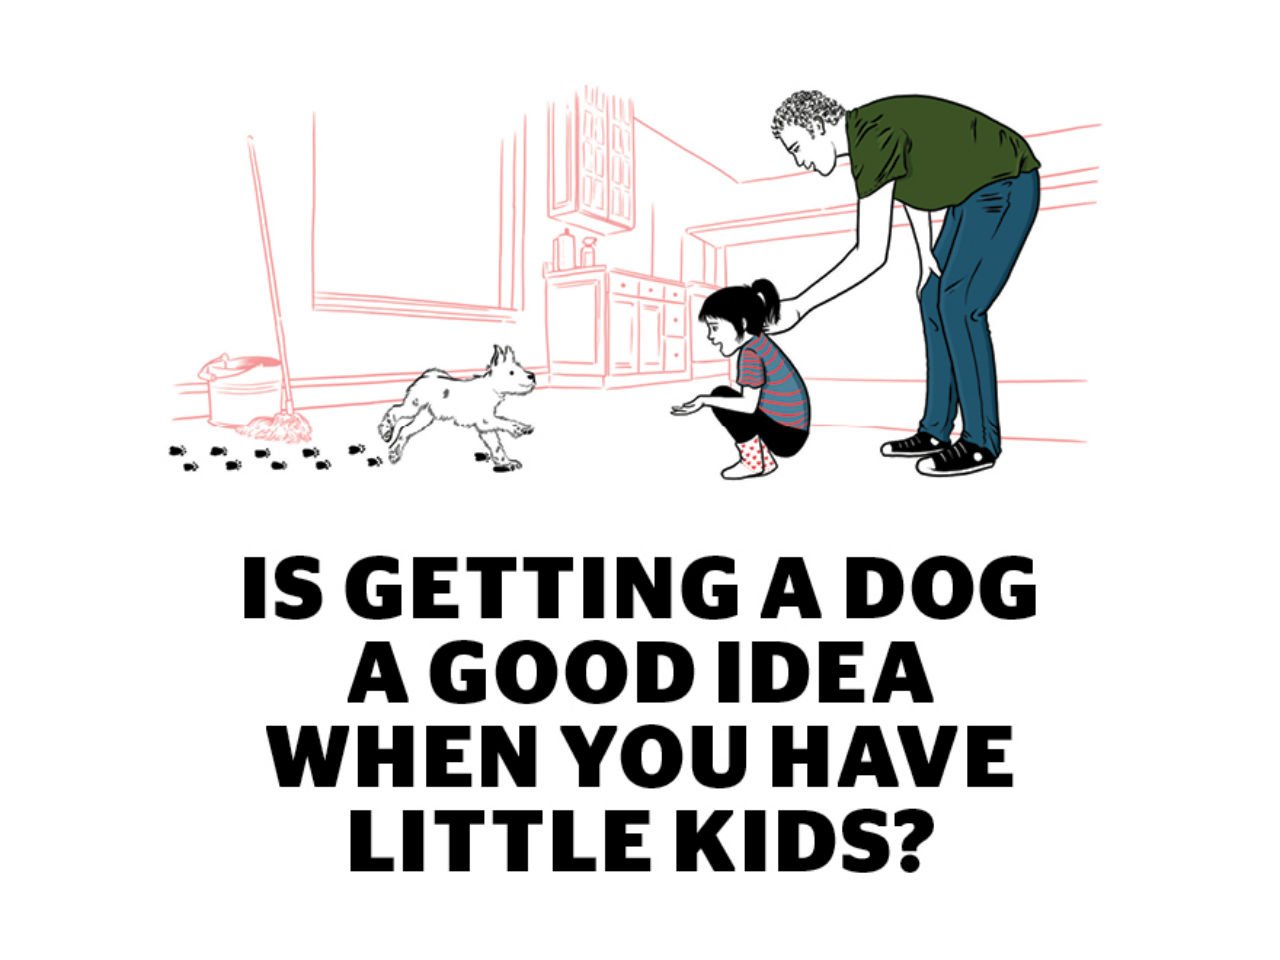 How to teach your kid to safely approach dogs